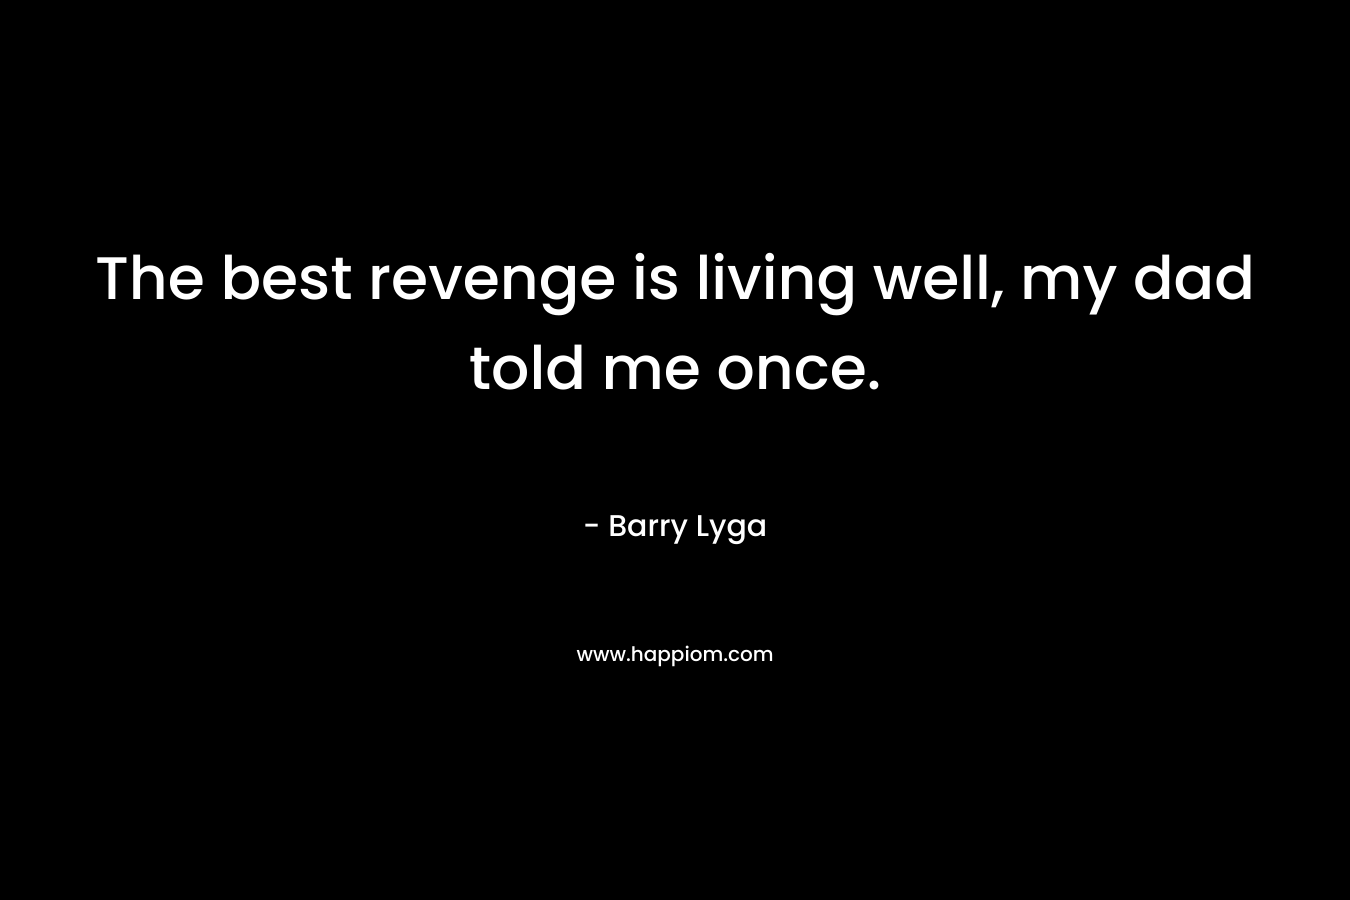 The best revenge is living well, my dad told me once.